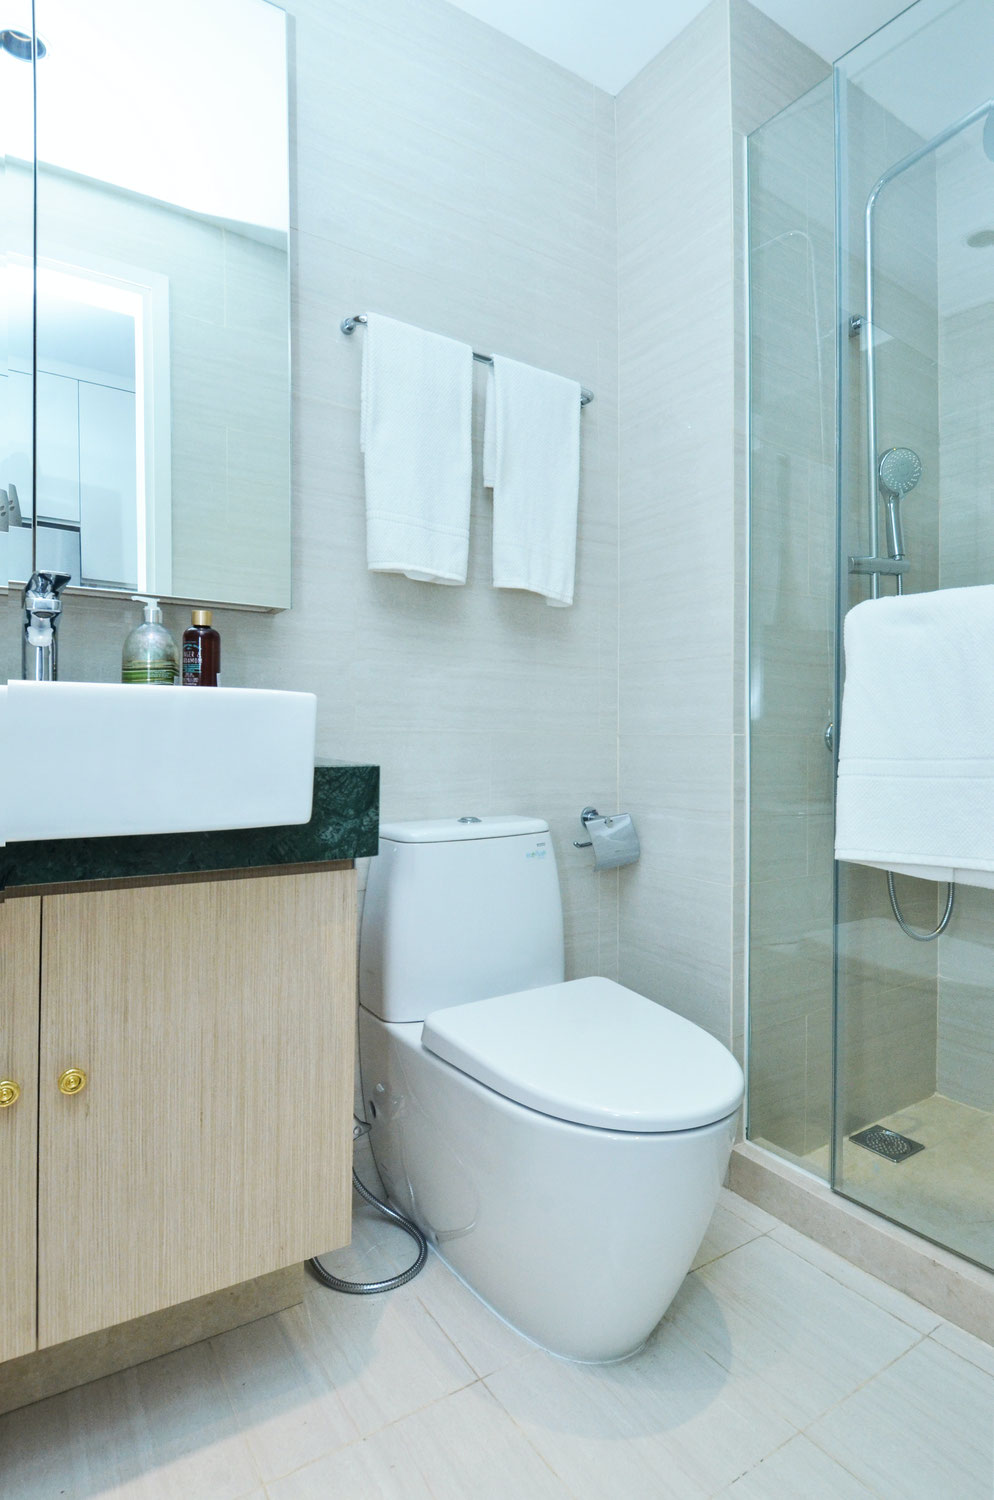 The Beginner's Guide to a Successful Bathroom Renovation